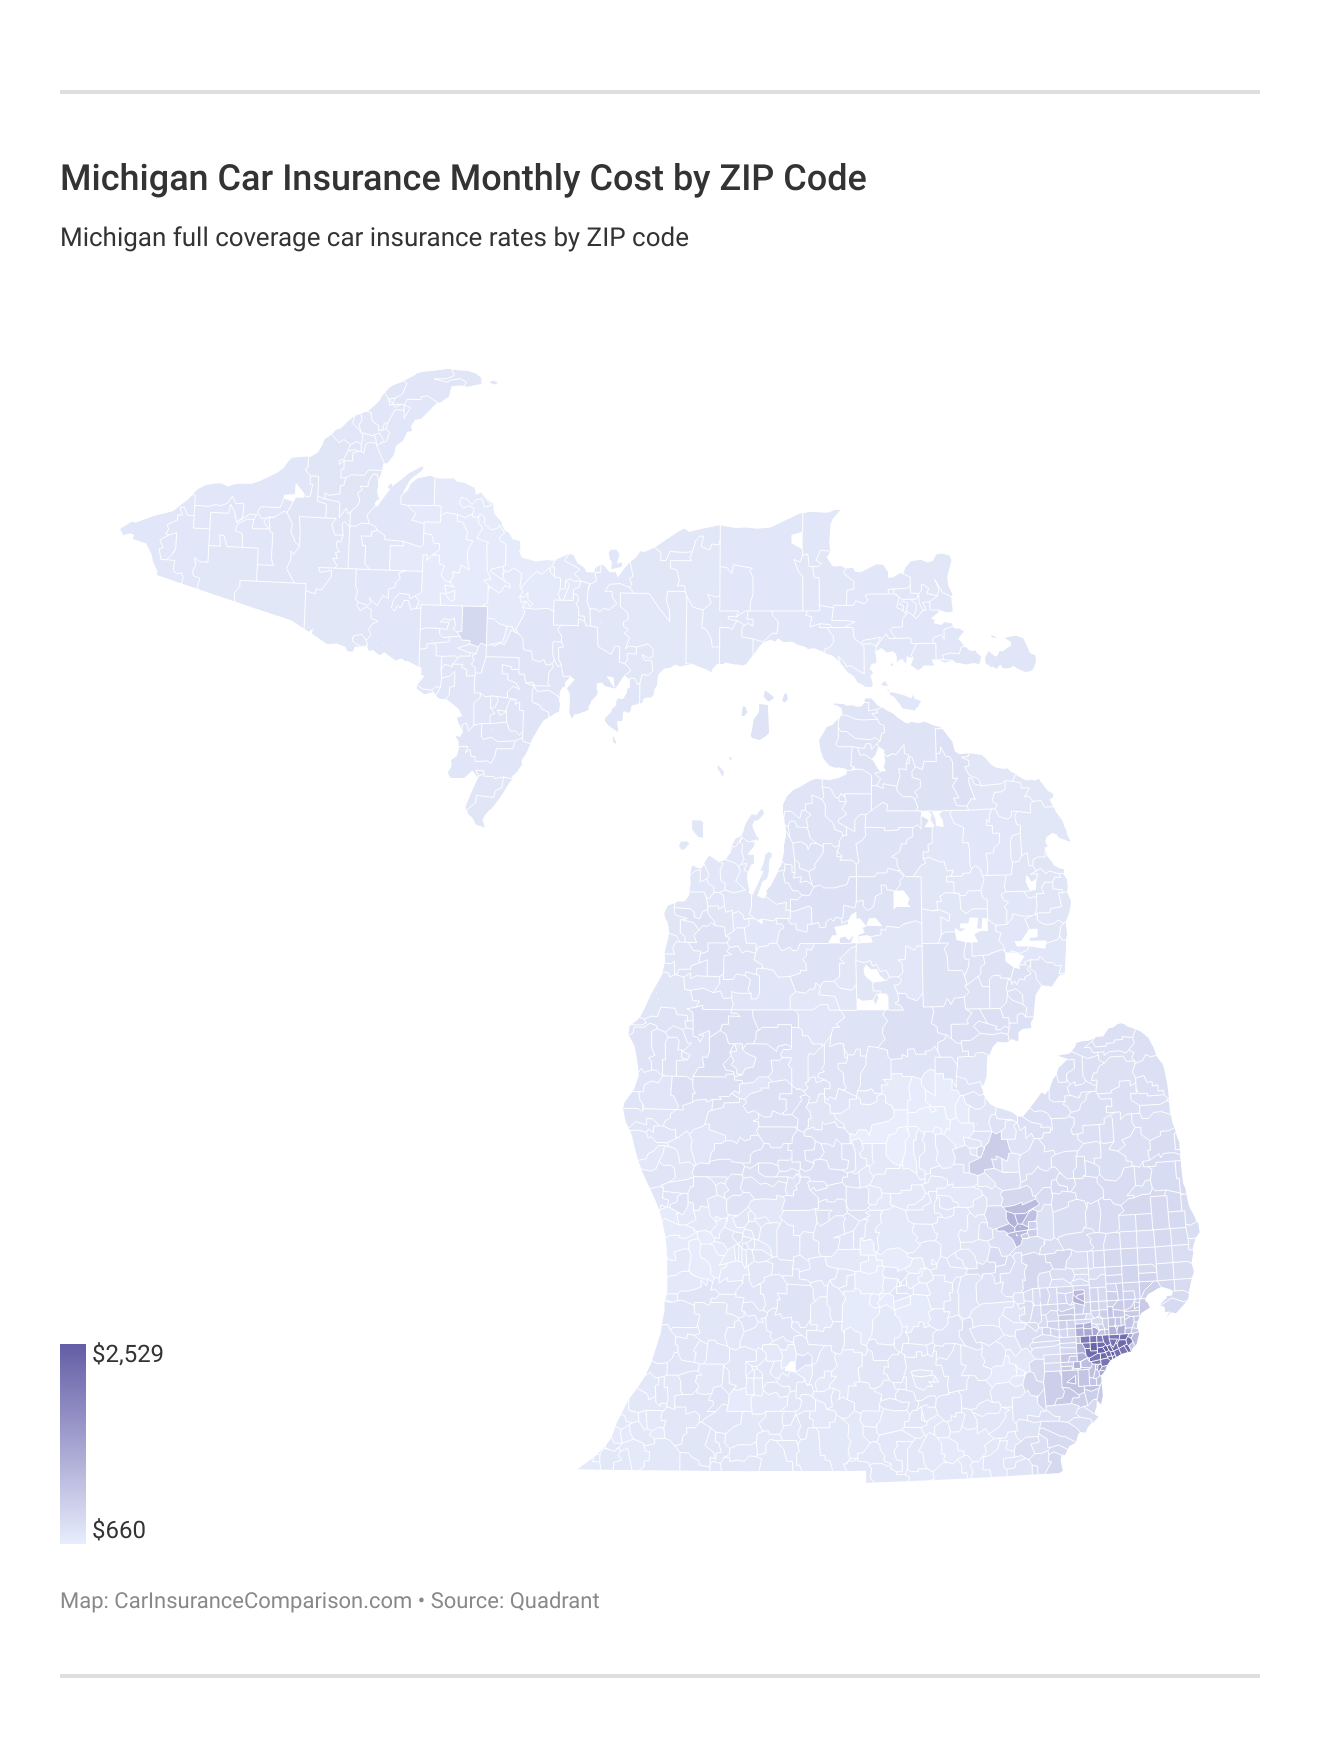 <h3>Michigan Car Insurance Monthly Cost by ZIP Code</h3>